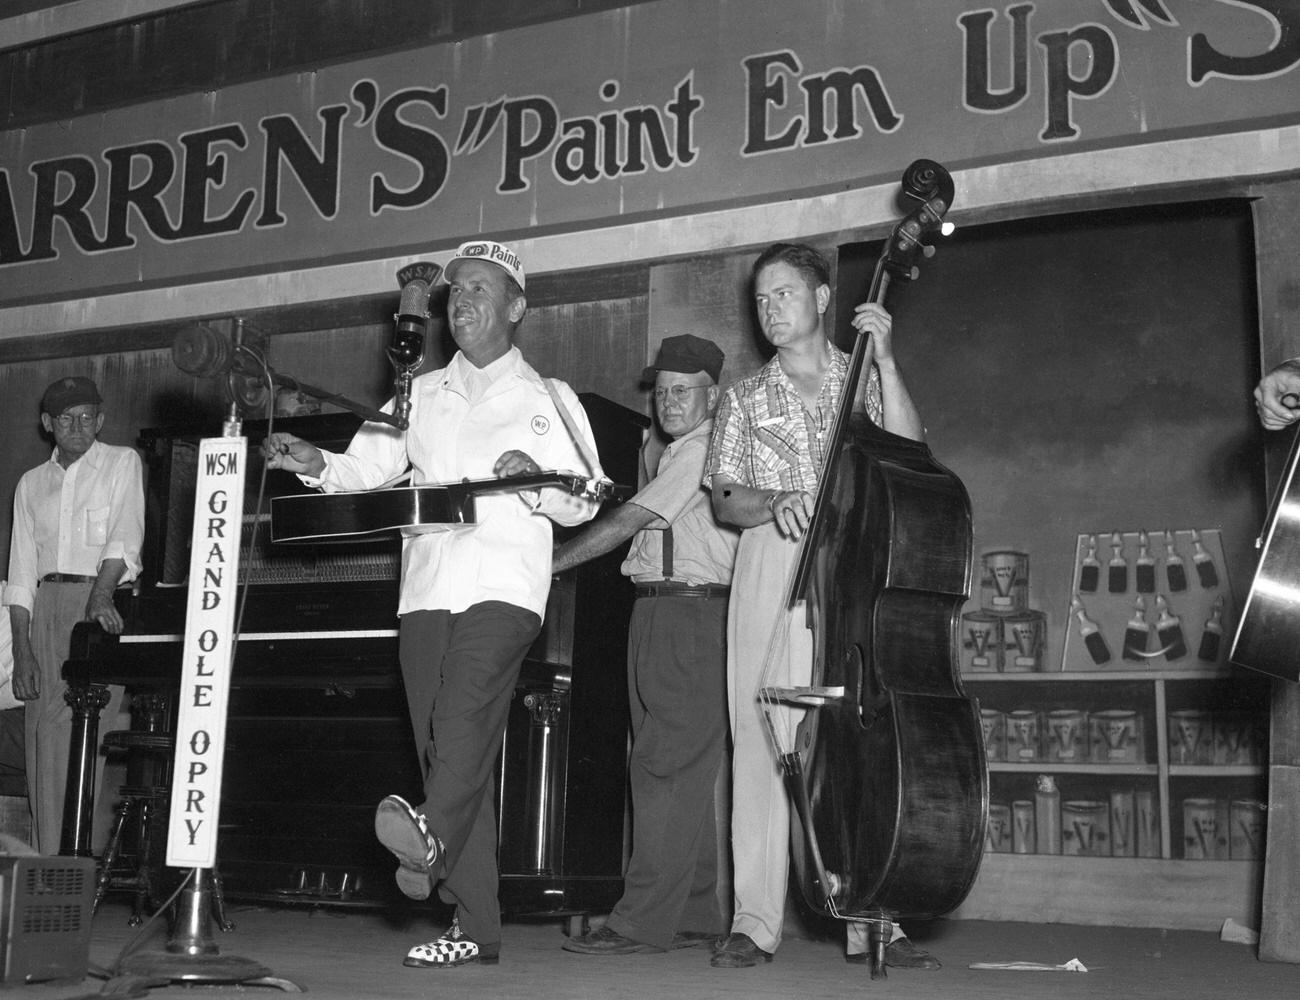 Country singer Lew Childre performing at the Grand Ole Opry, circa 1950, Nashville, Tennessee.